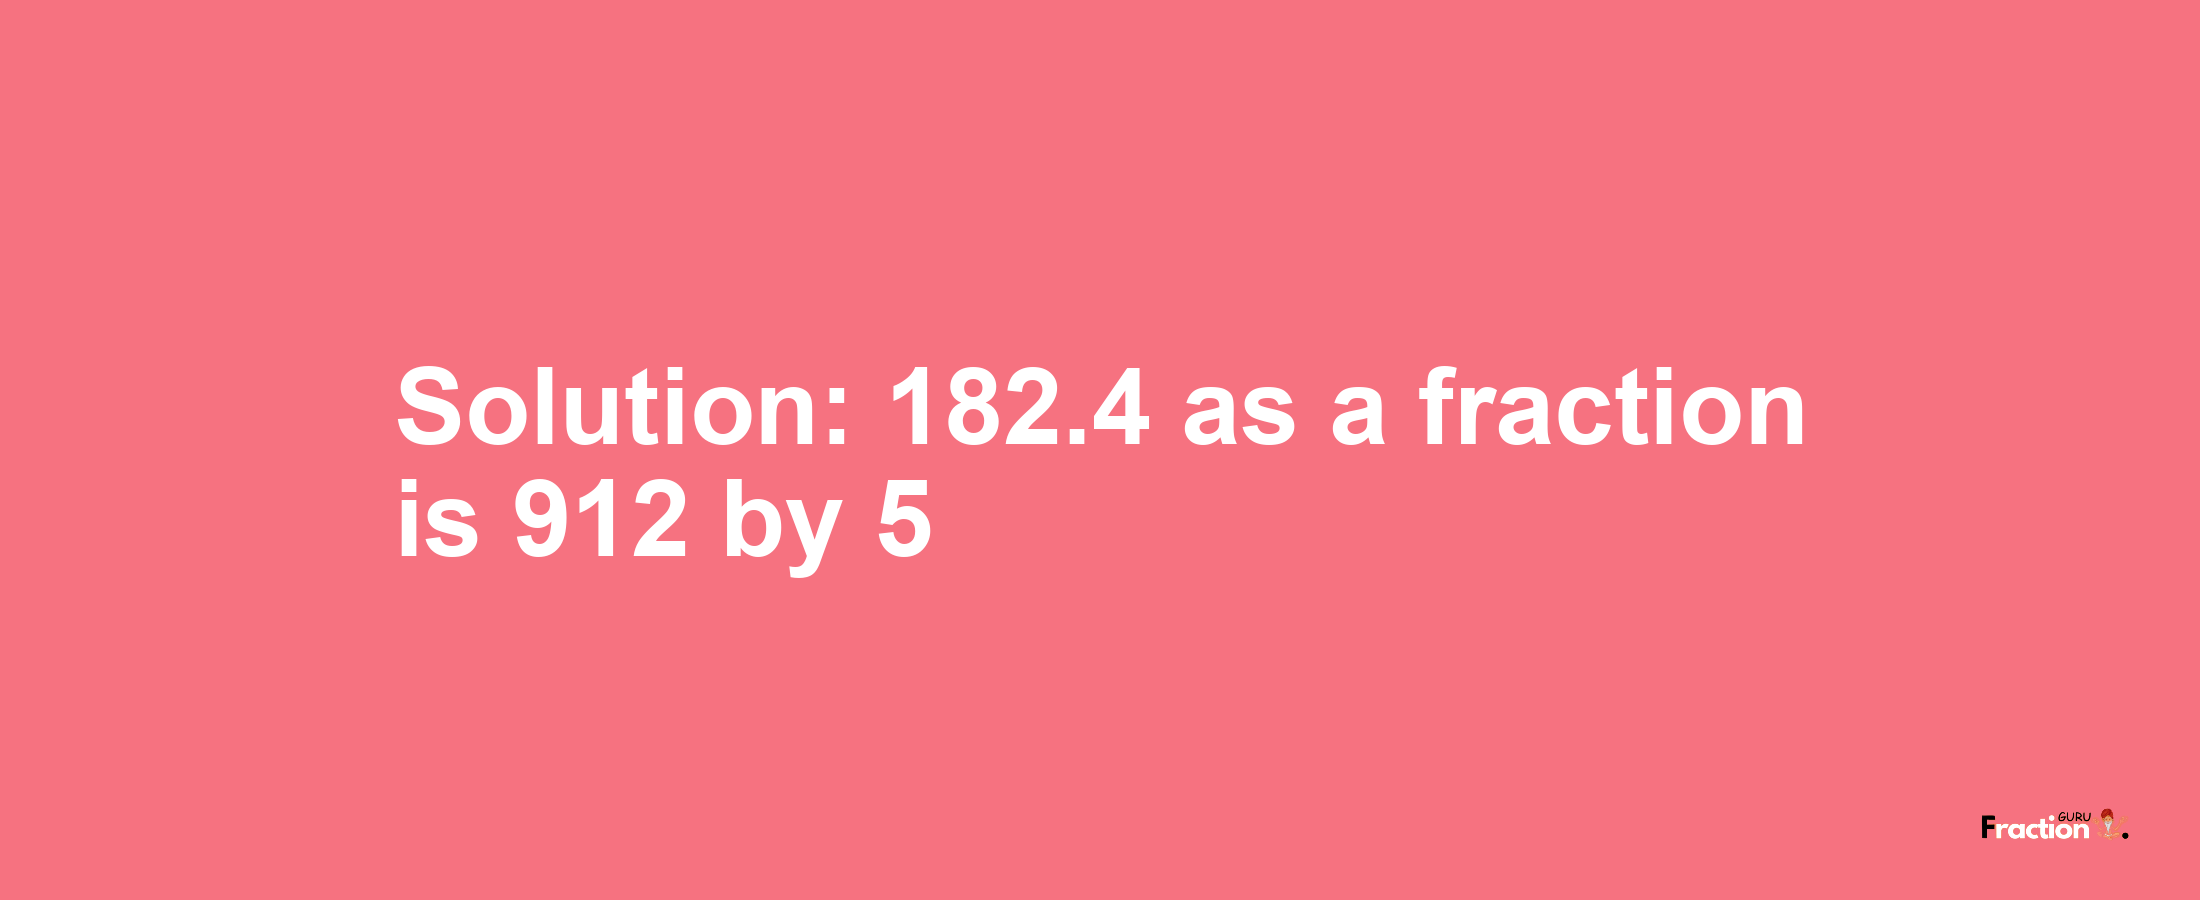 Solution:182.4 as a fraction is 912/5